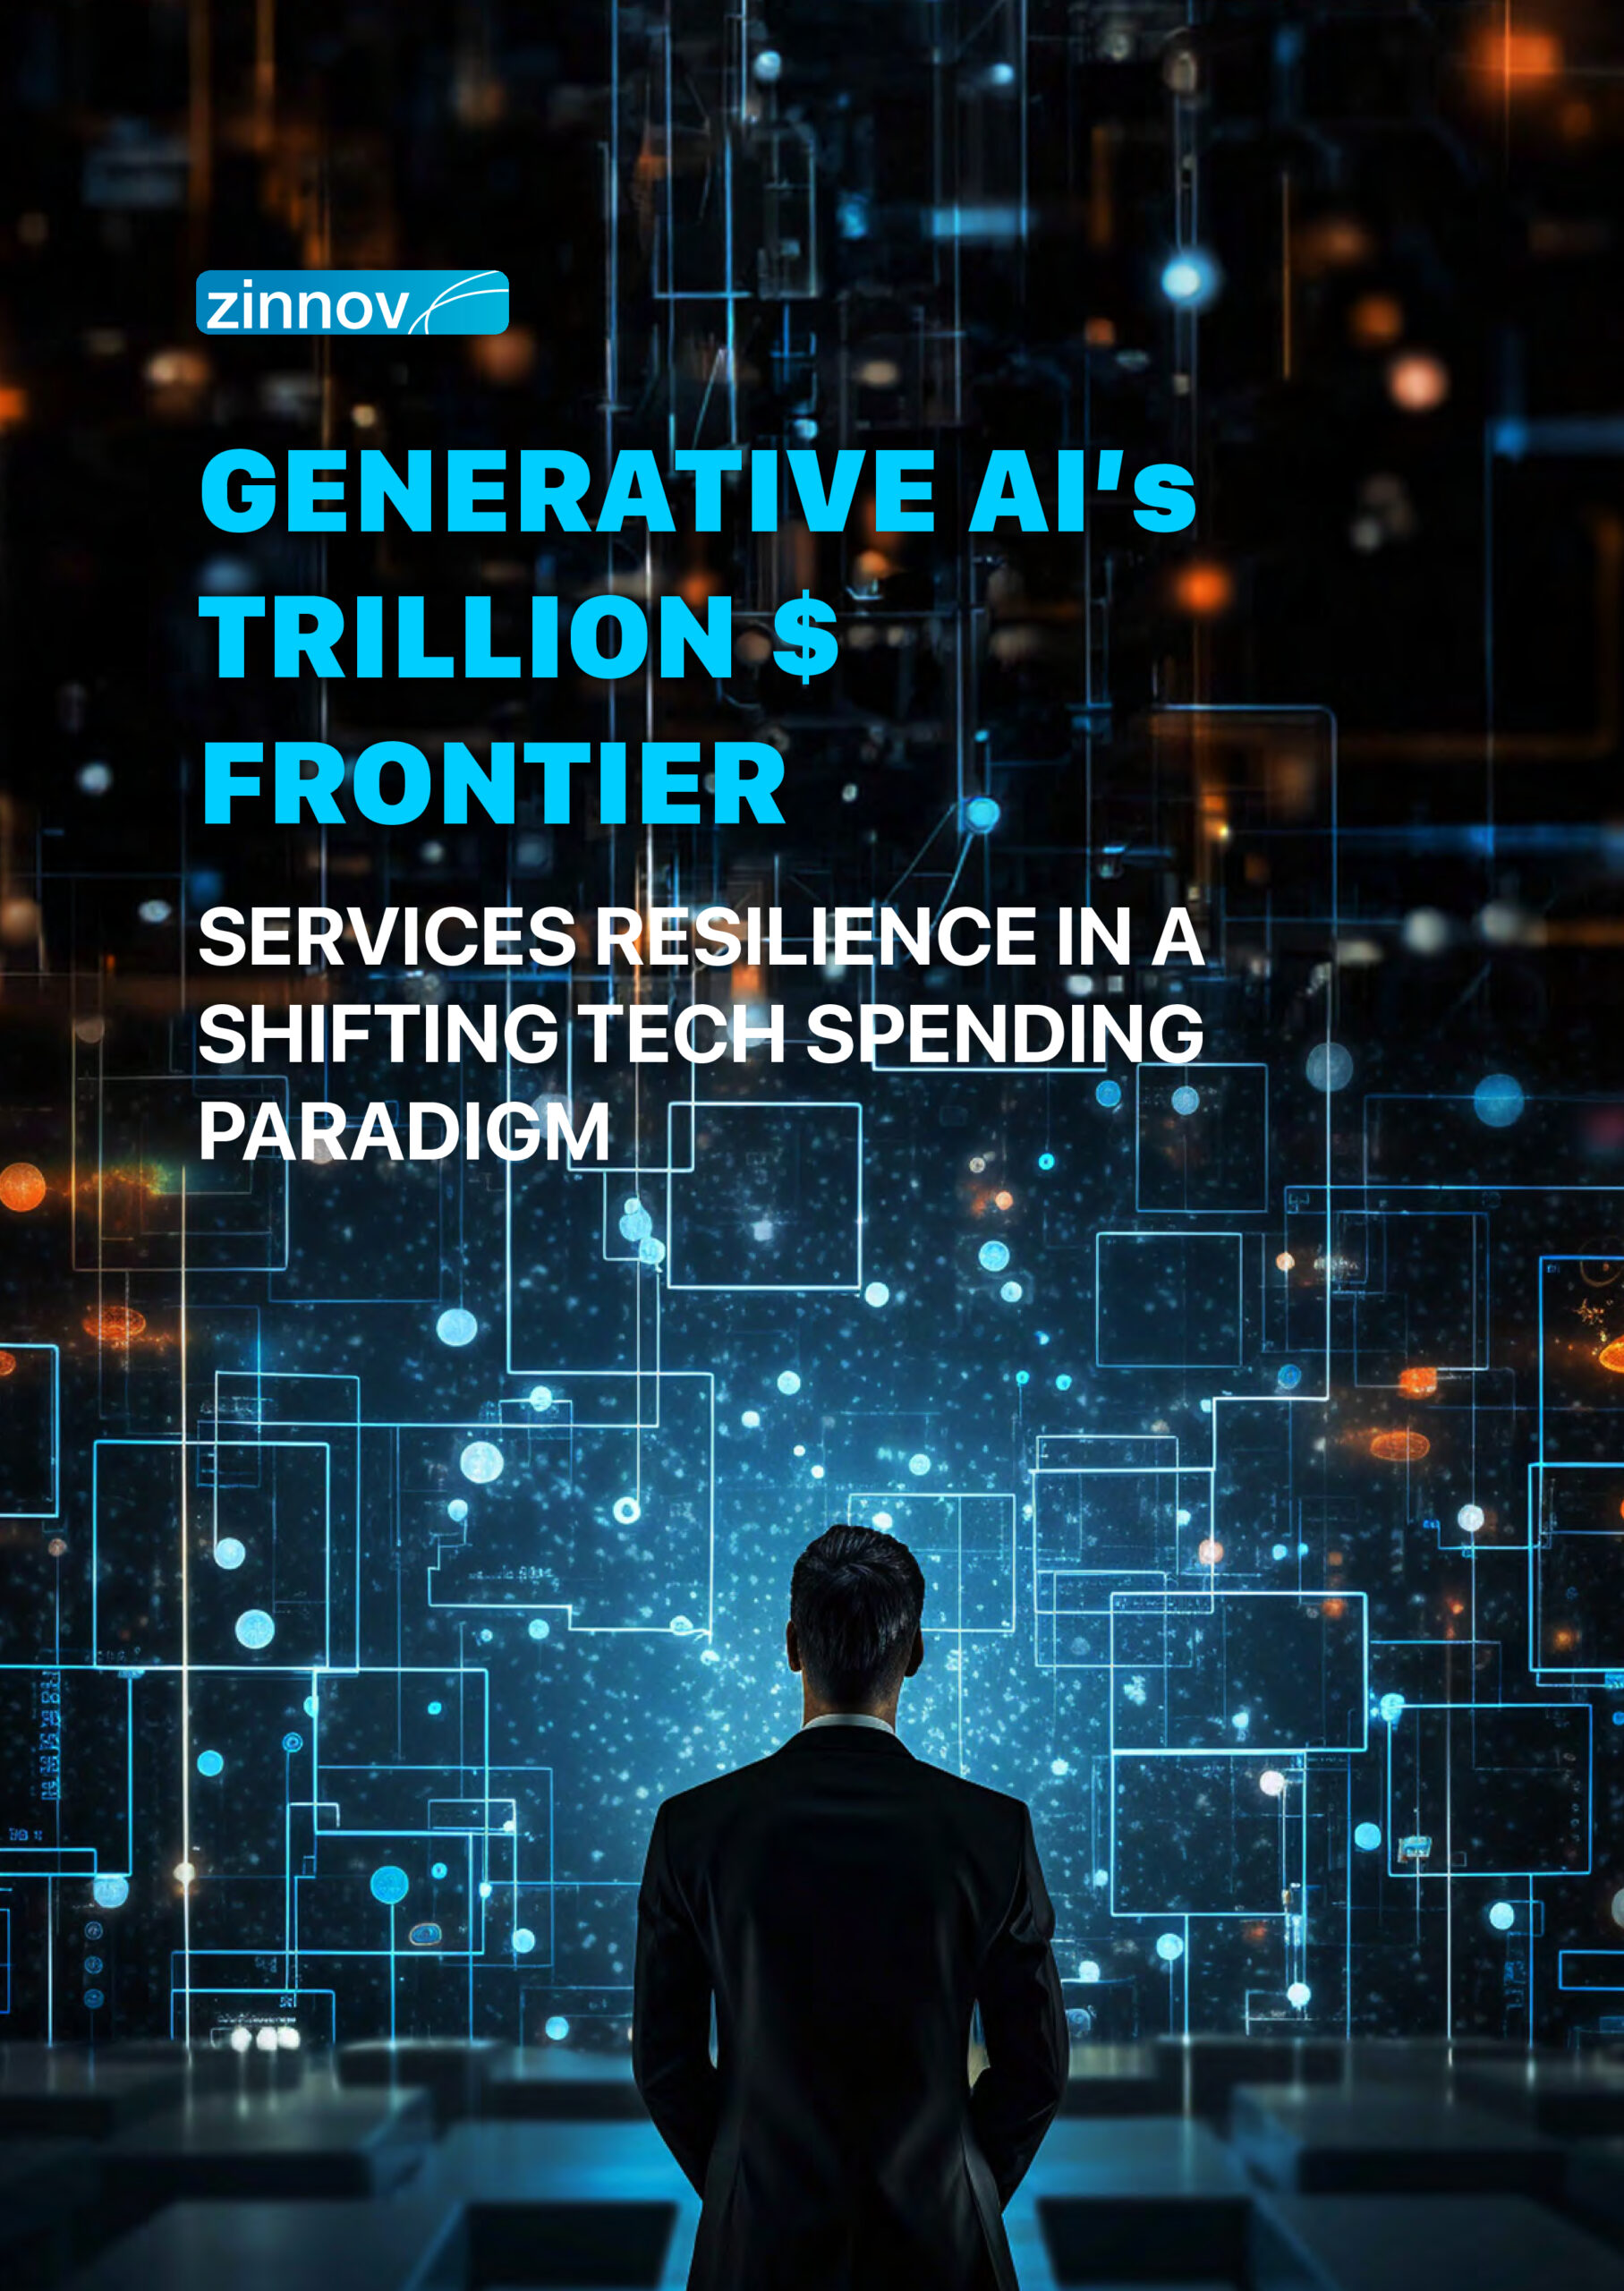 Zinnov Generative Ai Trillion Dollar Frontier Services Resilience In A Shifting Tech Spending Paradigm Report1 Scaled